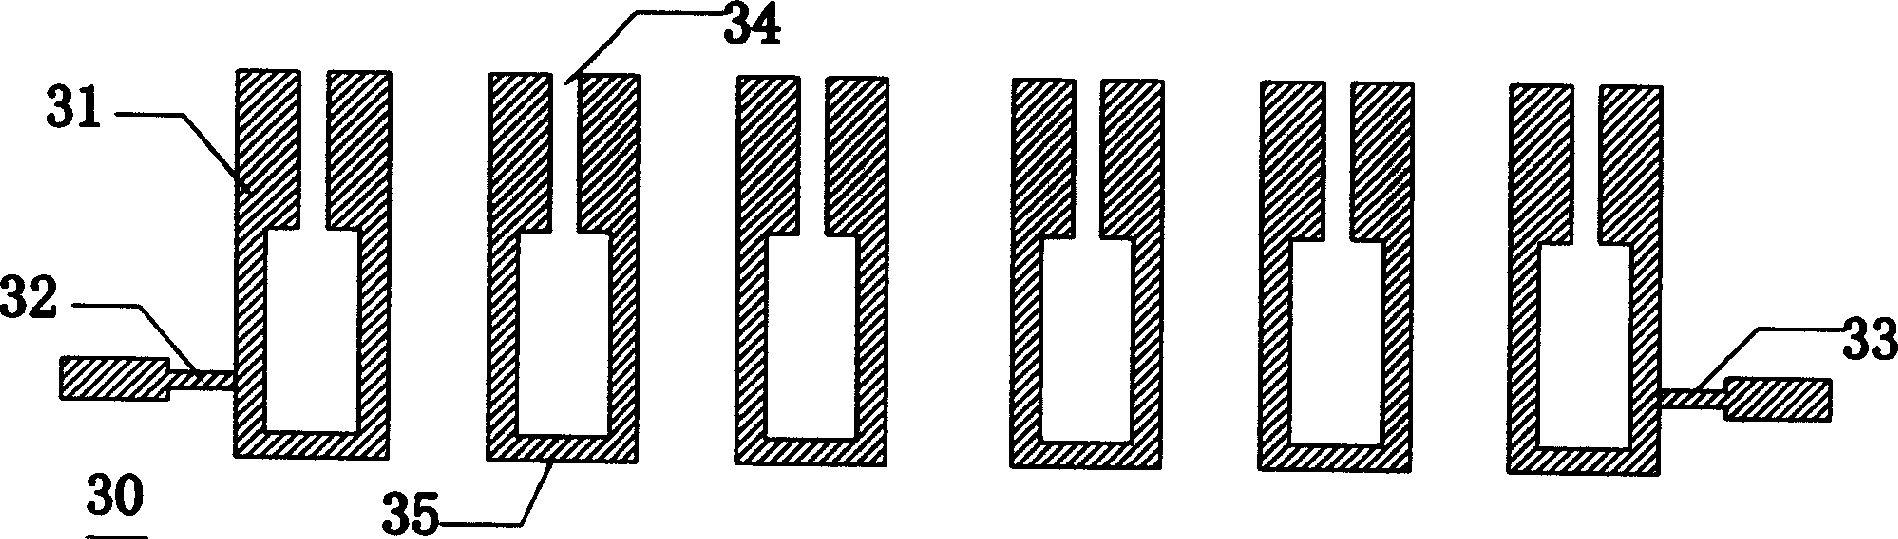 Resonator with symmetric double helix structure and filter thereof